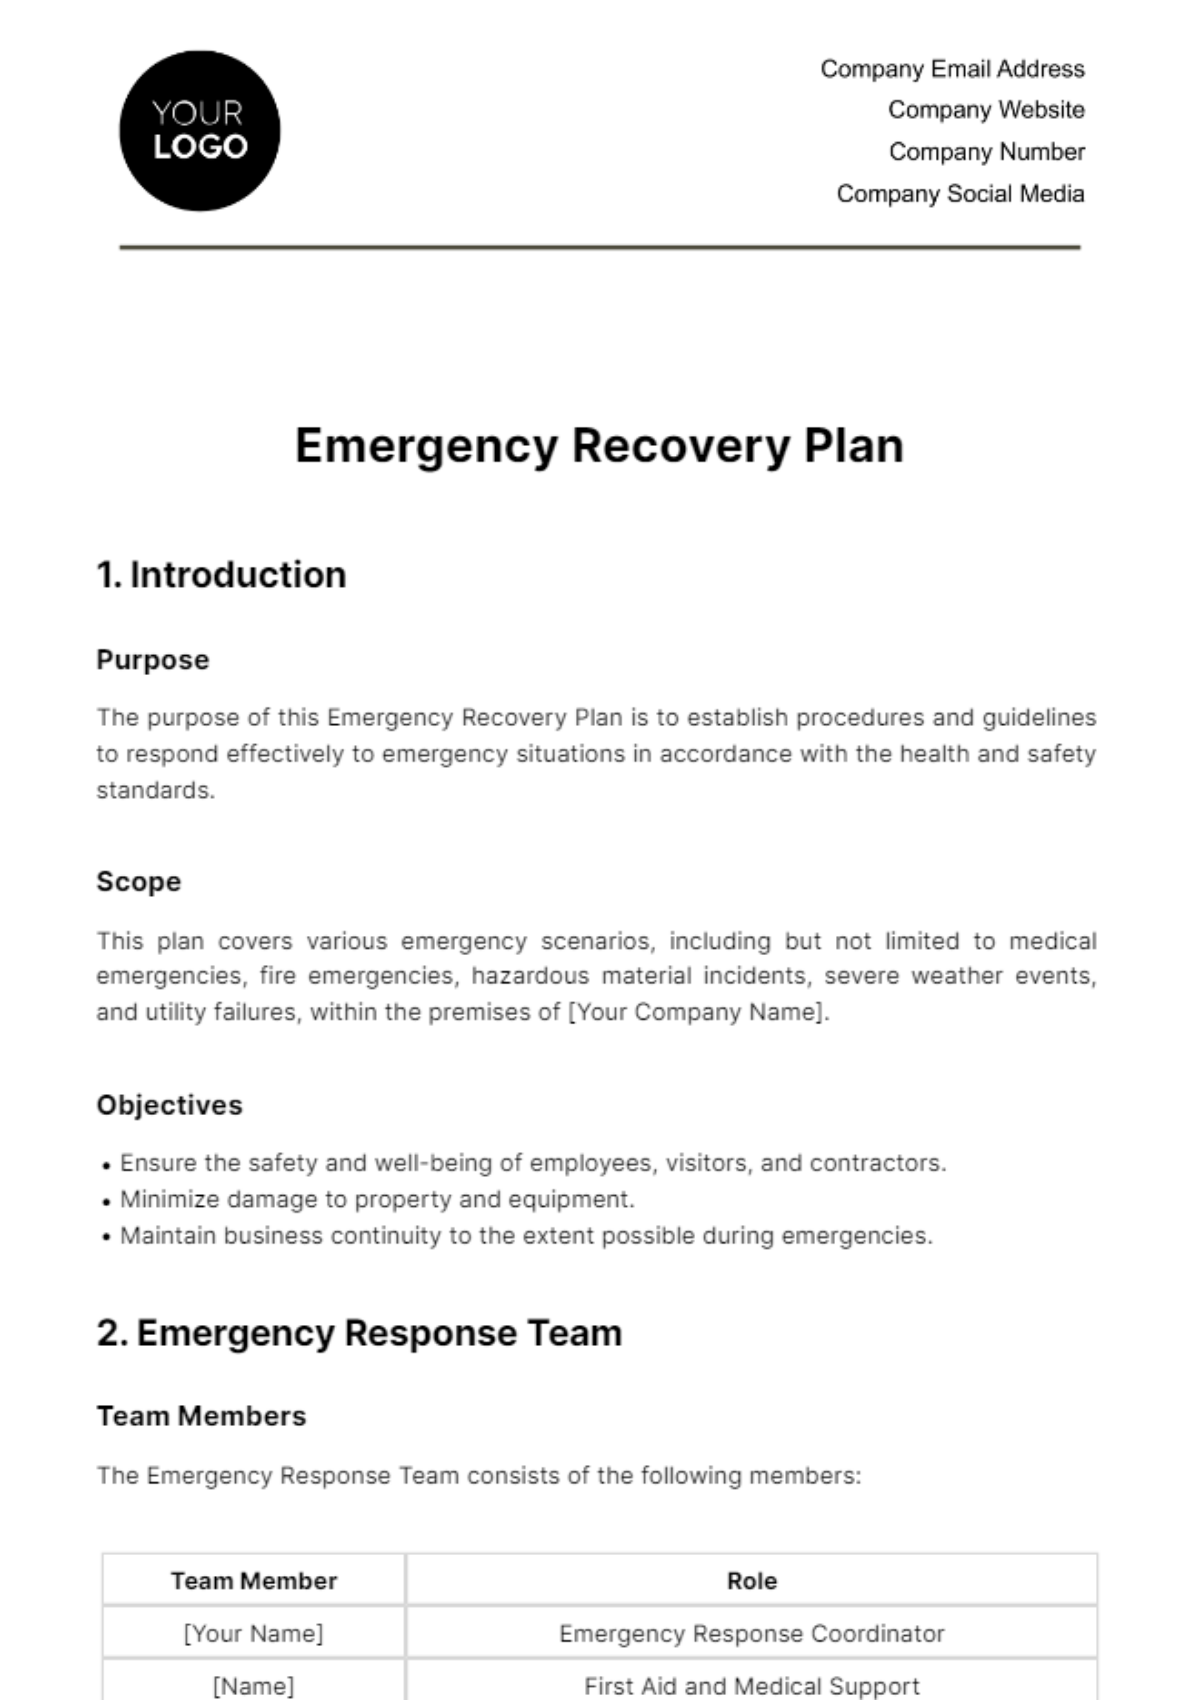 Free Emergency Recovery Plan Template